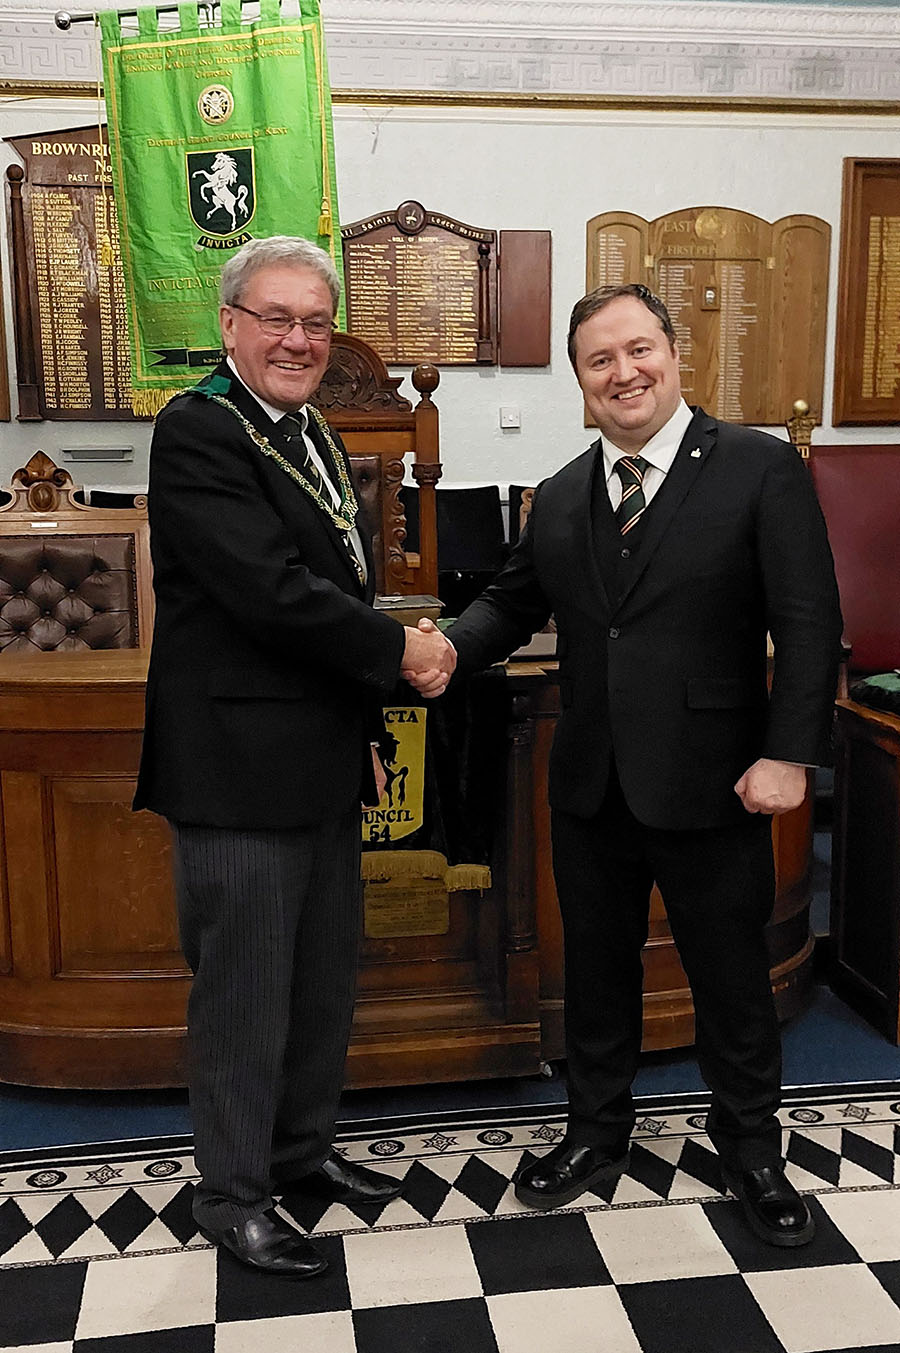 Bro Shame Lawlor being congratulated by the DGP R.W.Bro Brian Ward